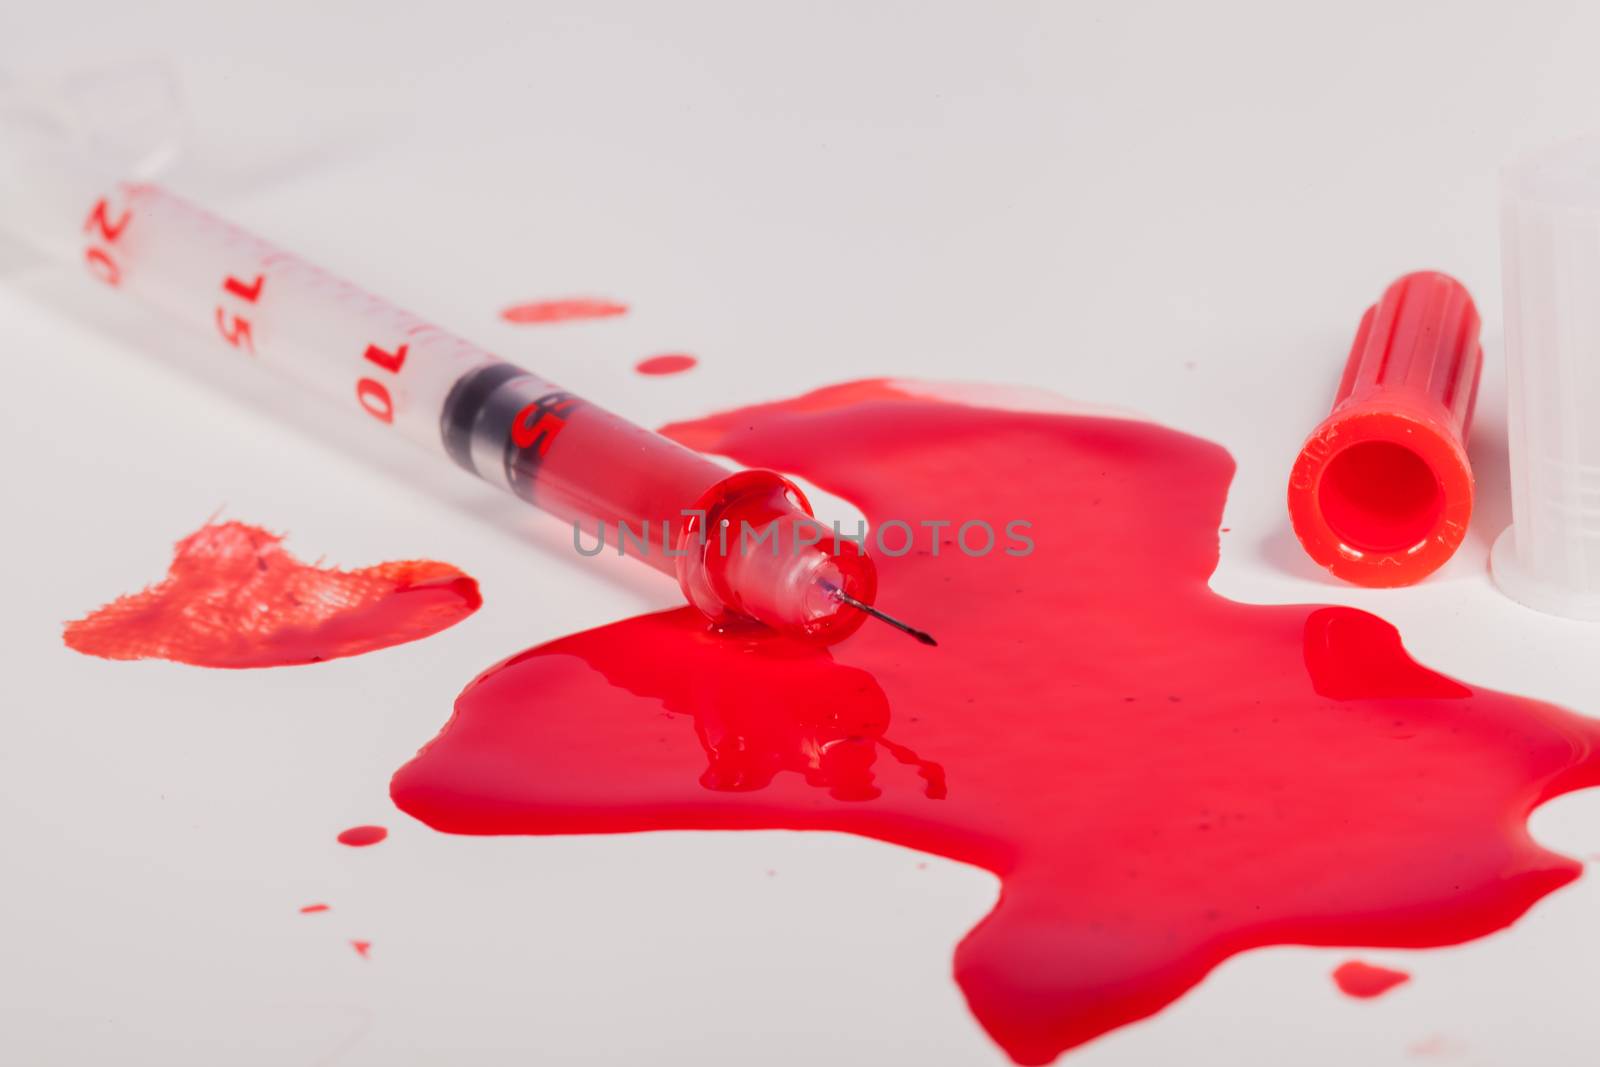 Syringe Squirting Red Blood onto White Background by juniart